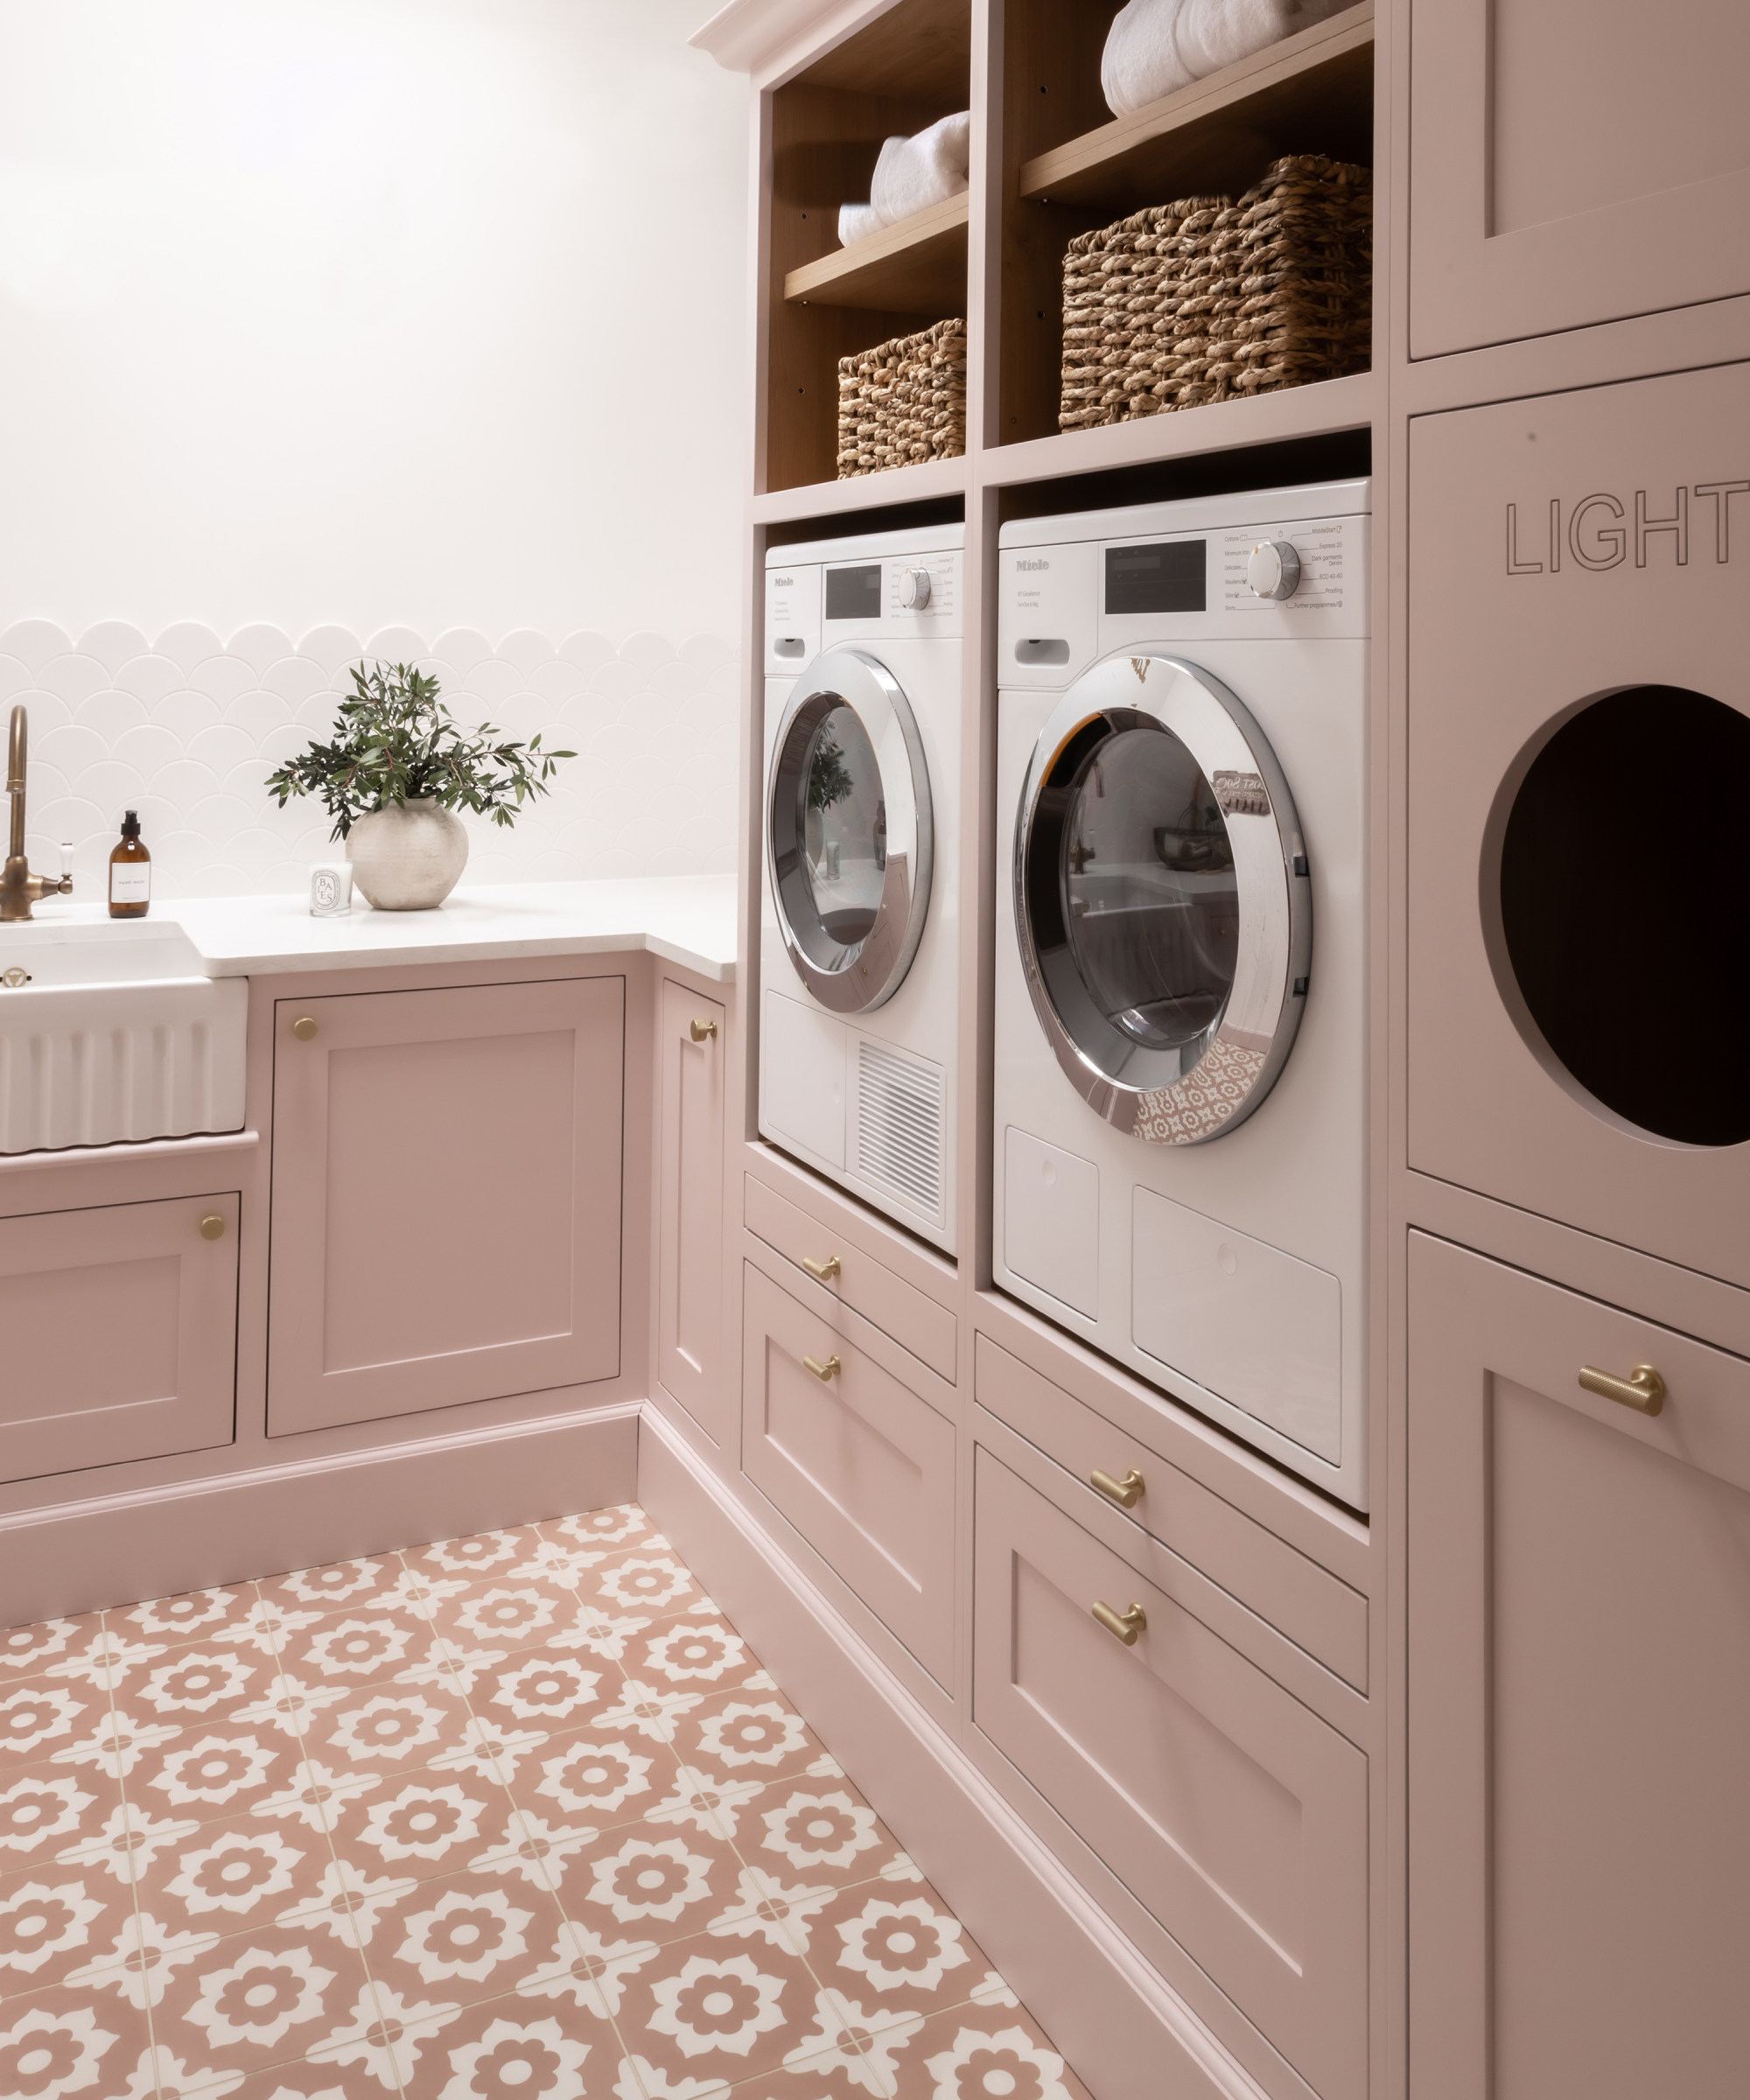 utility room with pink cabinets and pink geometric pattern floor tiles